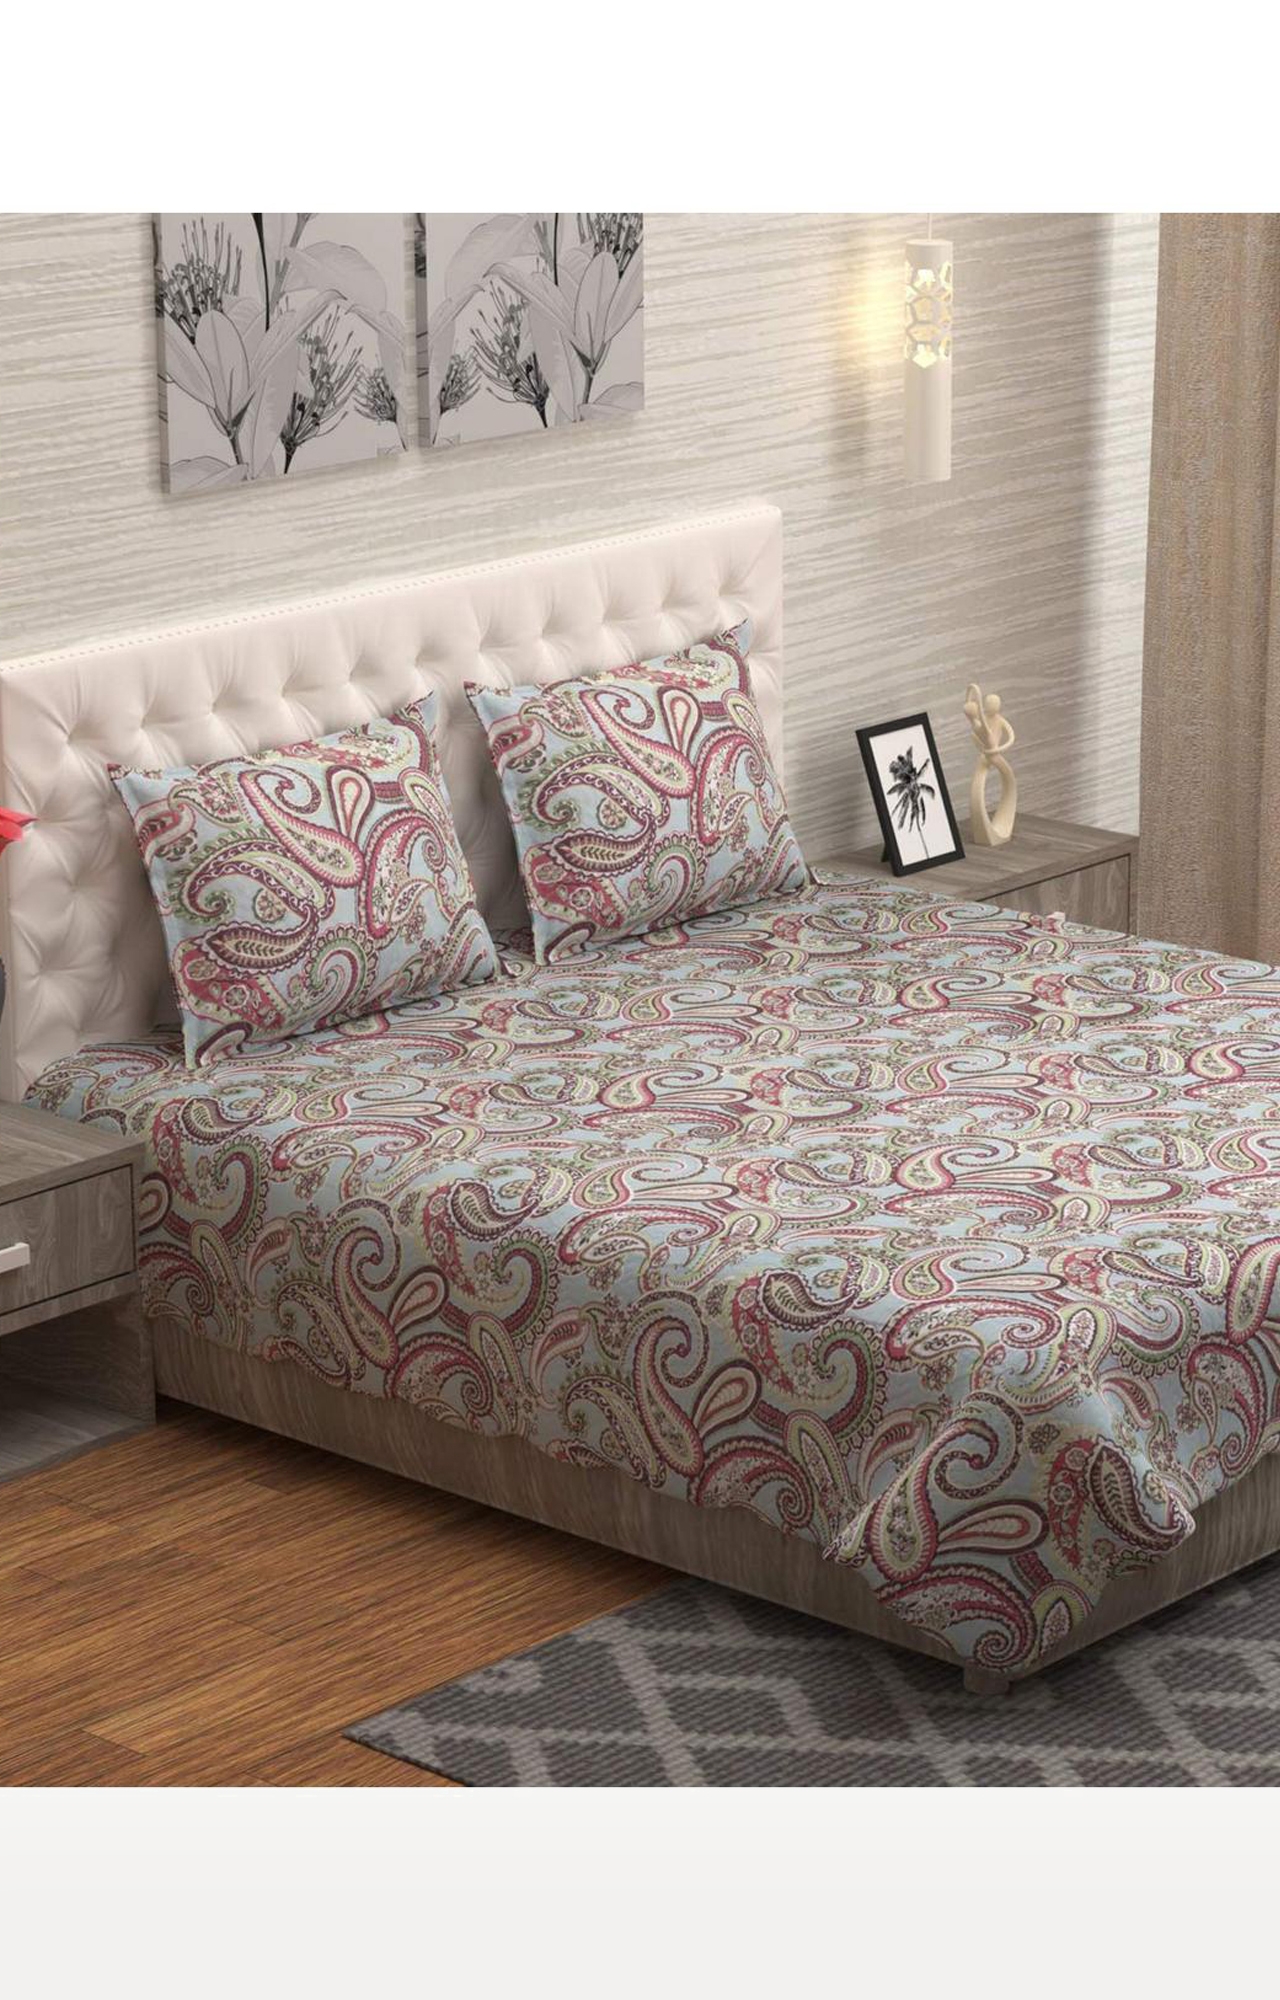 Sita Fabrics | Sita Fabrics Premium Cotton Printed Double Bed Cover with 2 Pillow Cover | 220 Thread Count - (90x108 Inches)